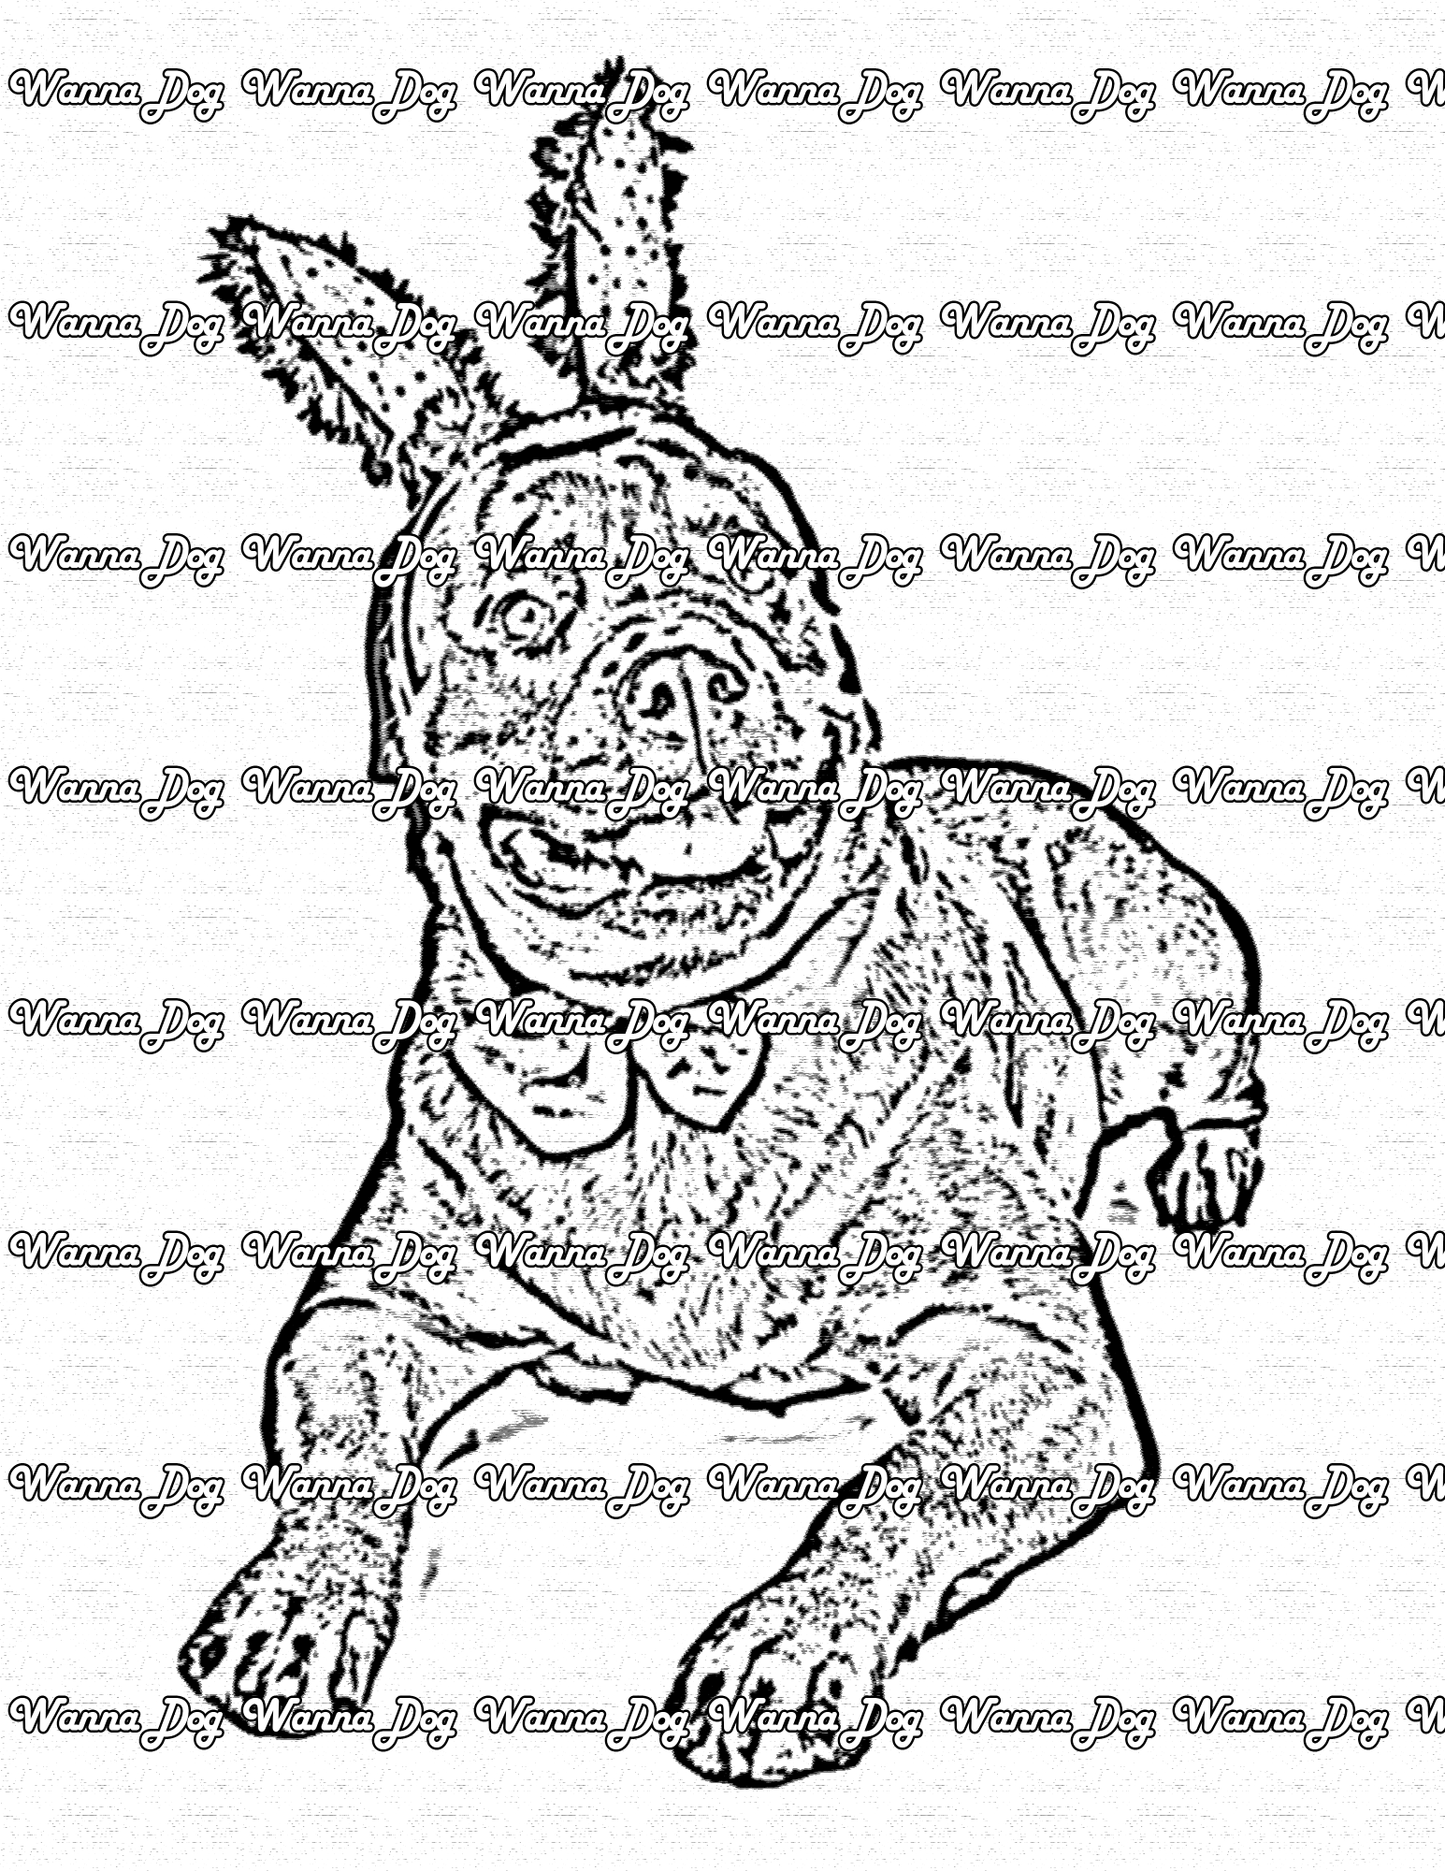 Rottweiler Coloring Page of a Rottweiler with bunny ears